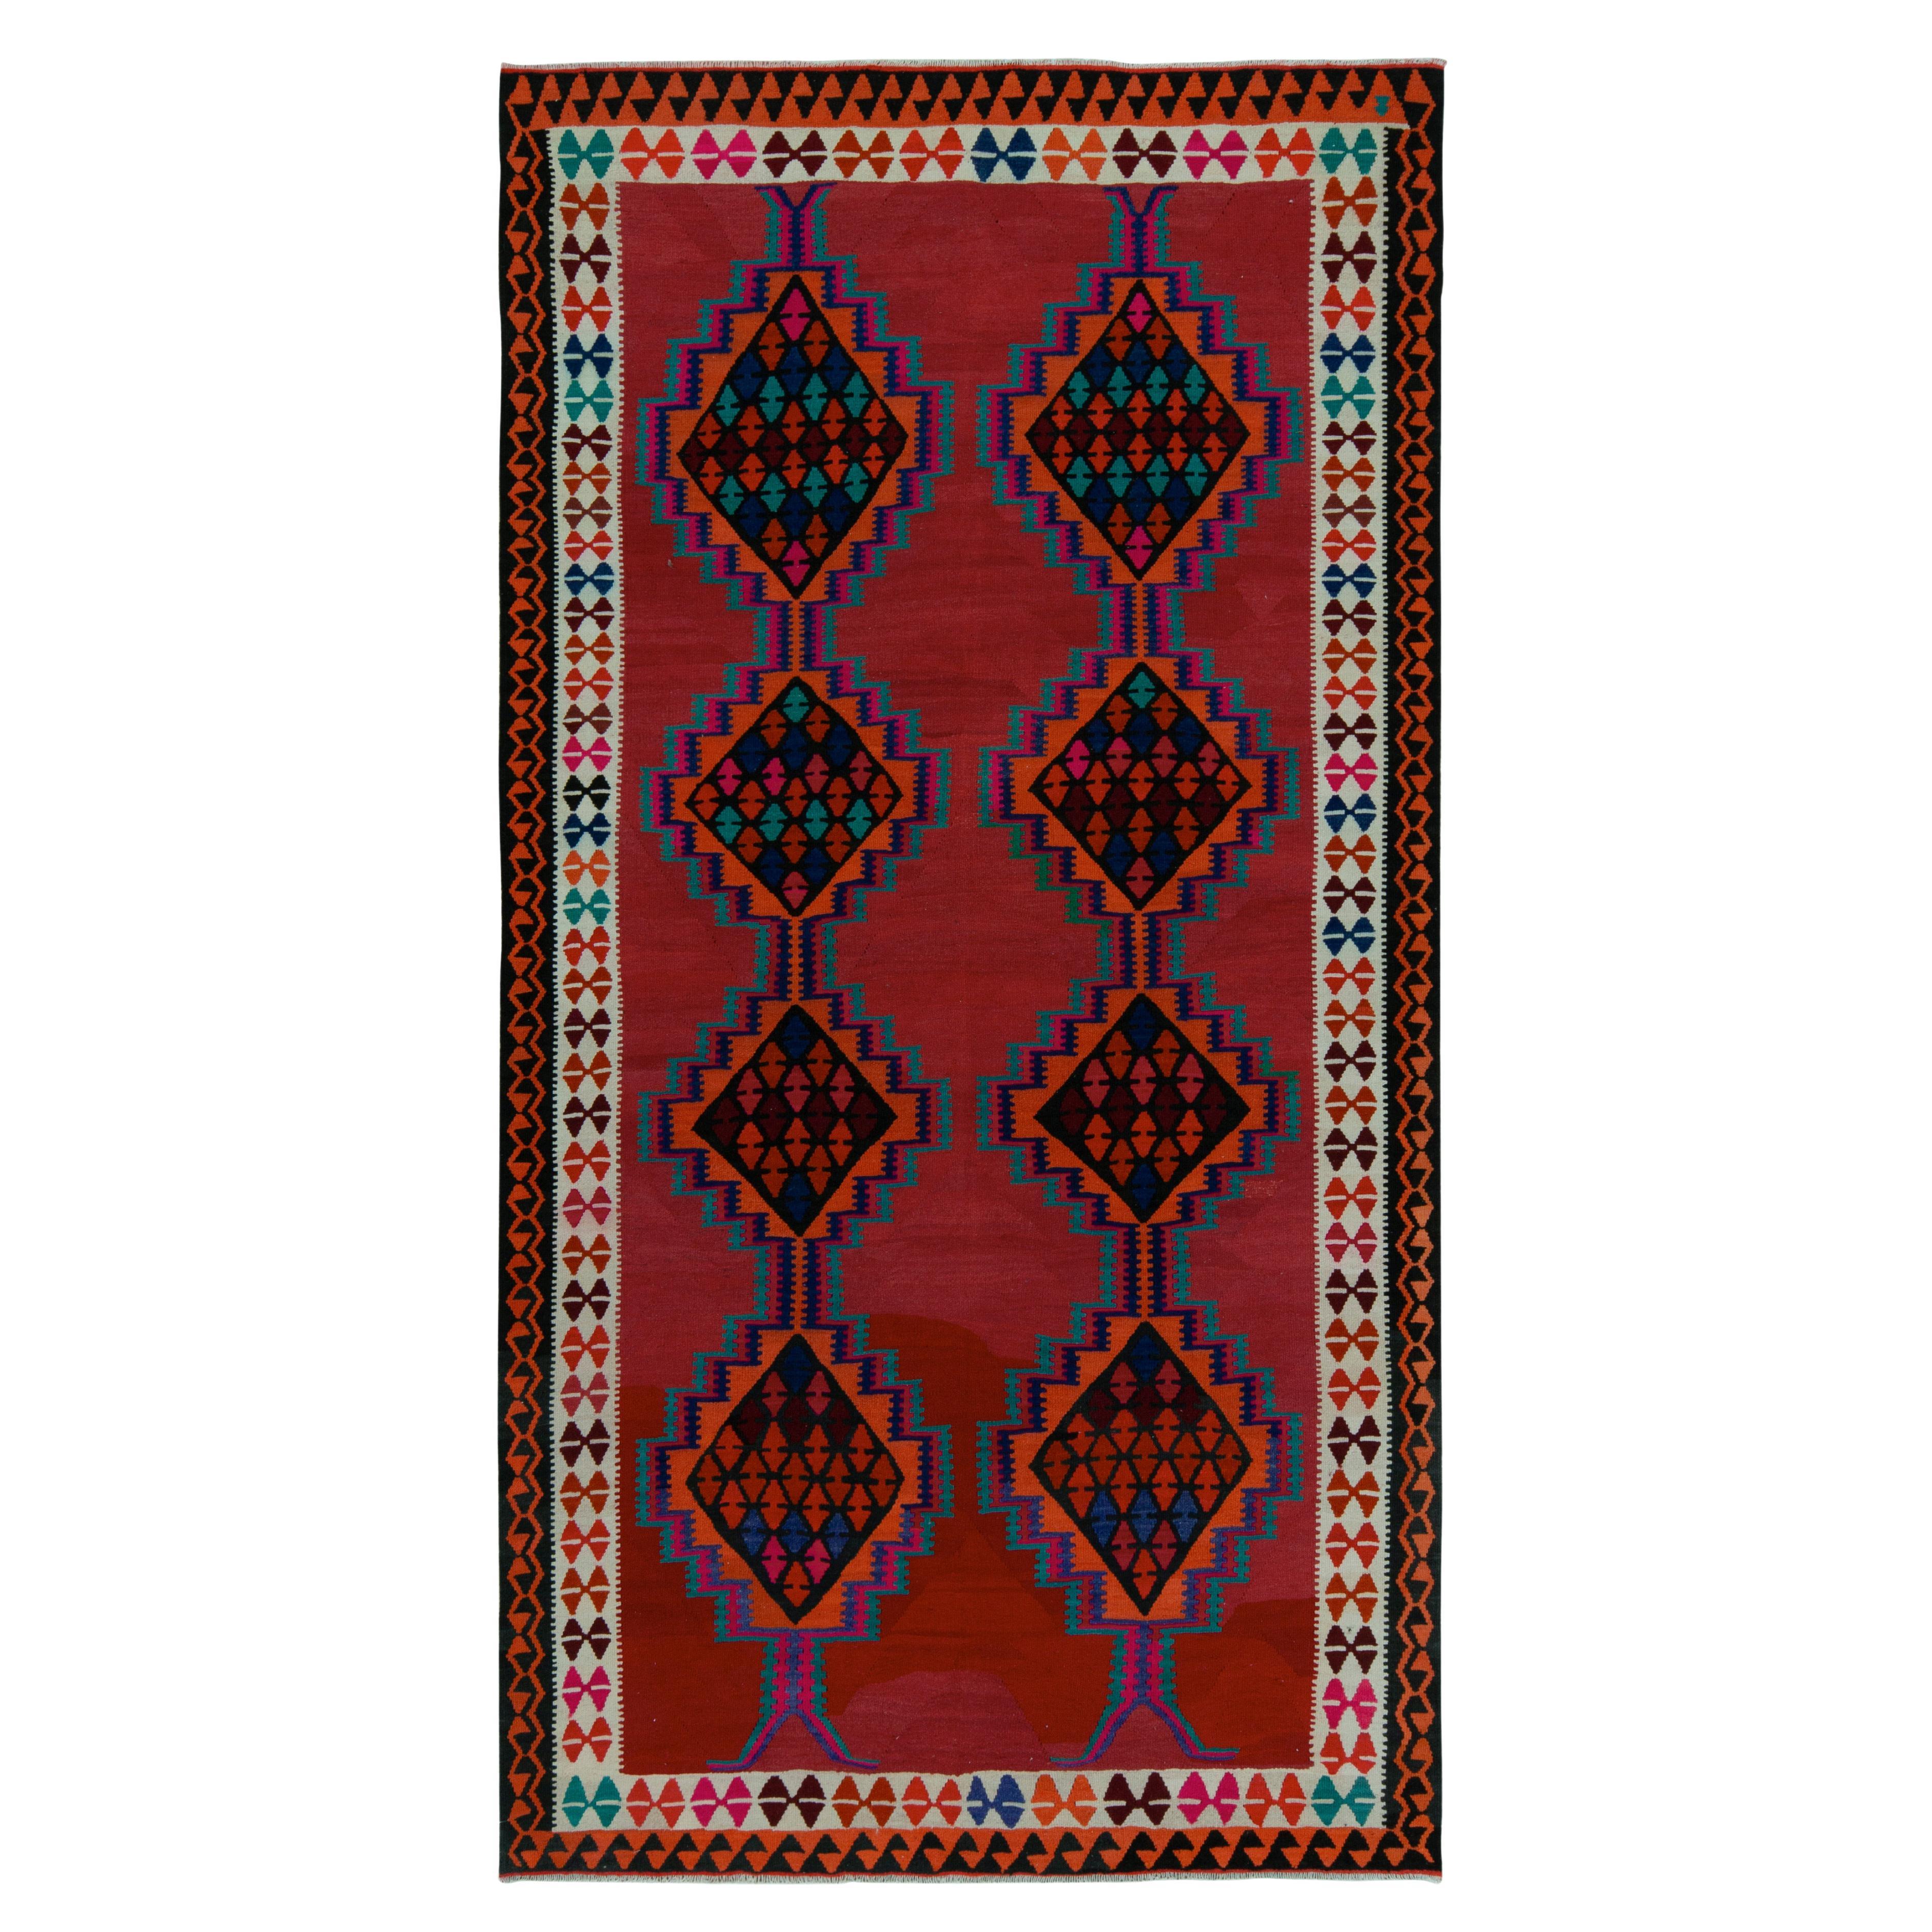 1950s Vintage Kilim Rug in Red with Colorful Geometric Patterns by Rug & Kilim For Sale